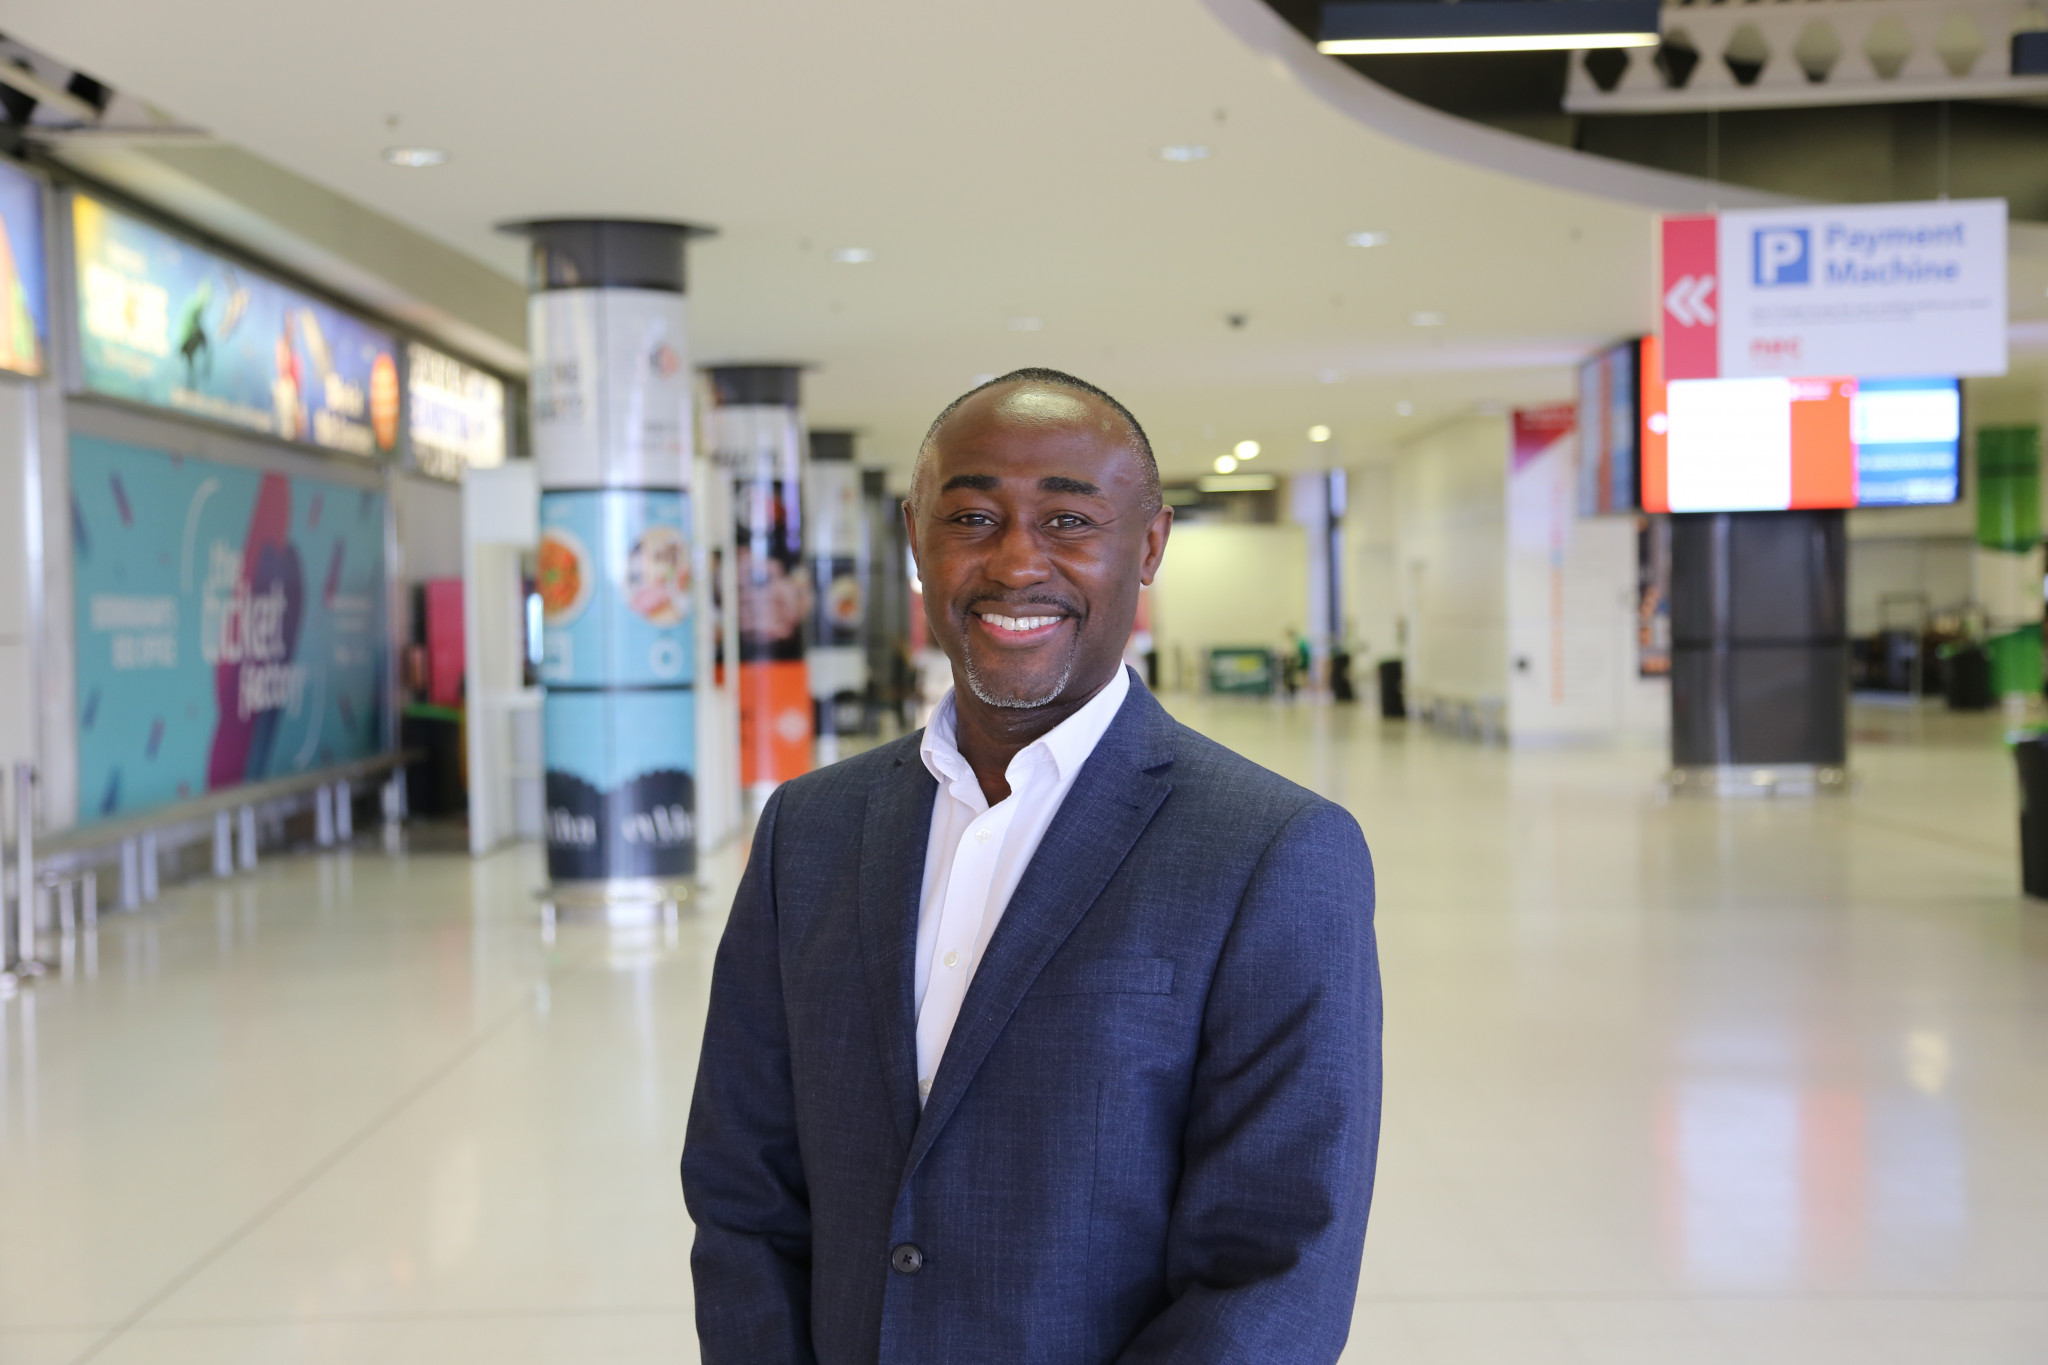 NEC Group appoint Commonwealth Games project manager for Birmingham 2022